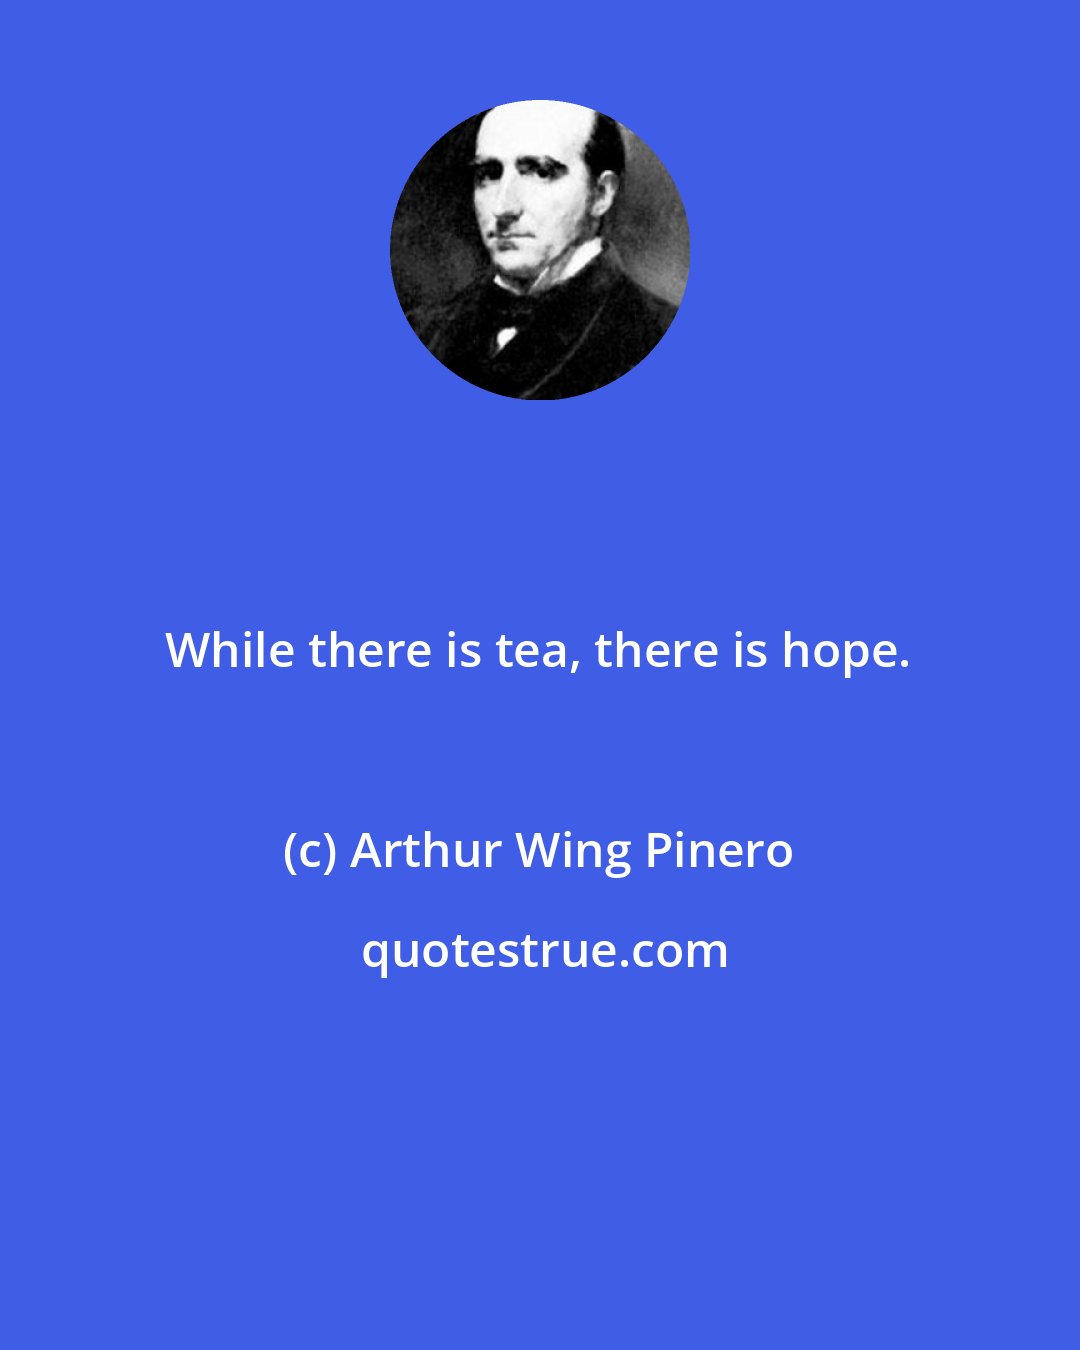 Arthur Wing Pinero: While there is tea, there is hope.